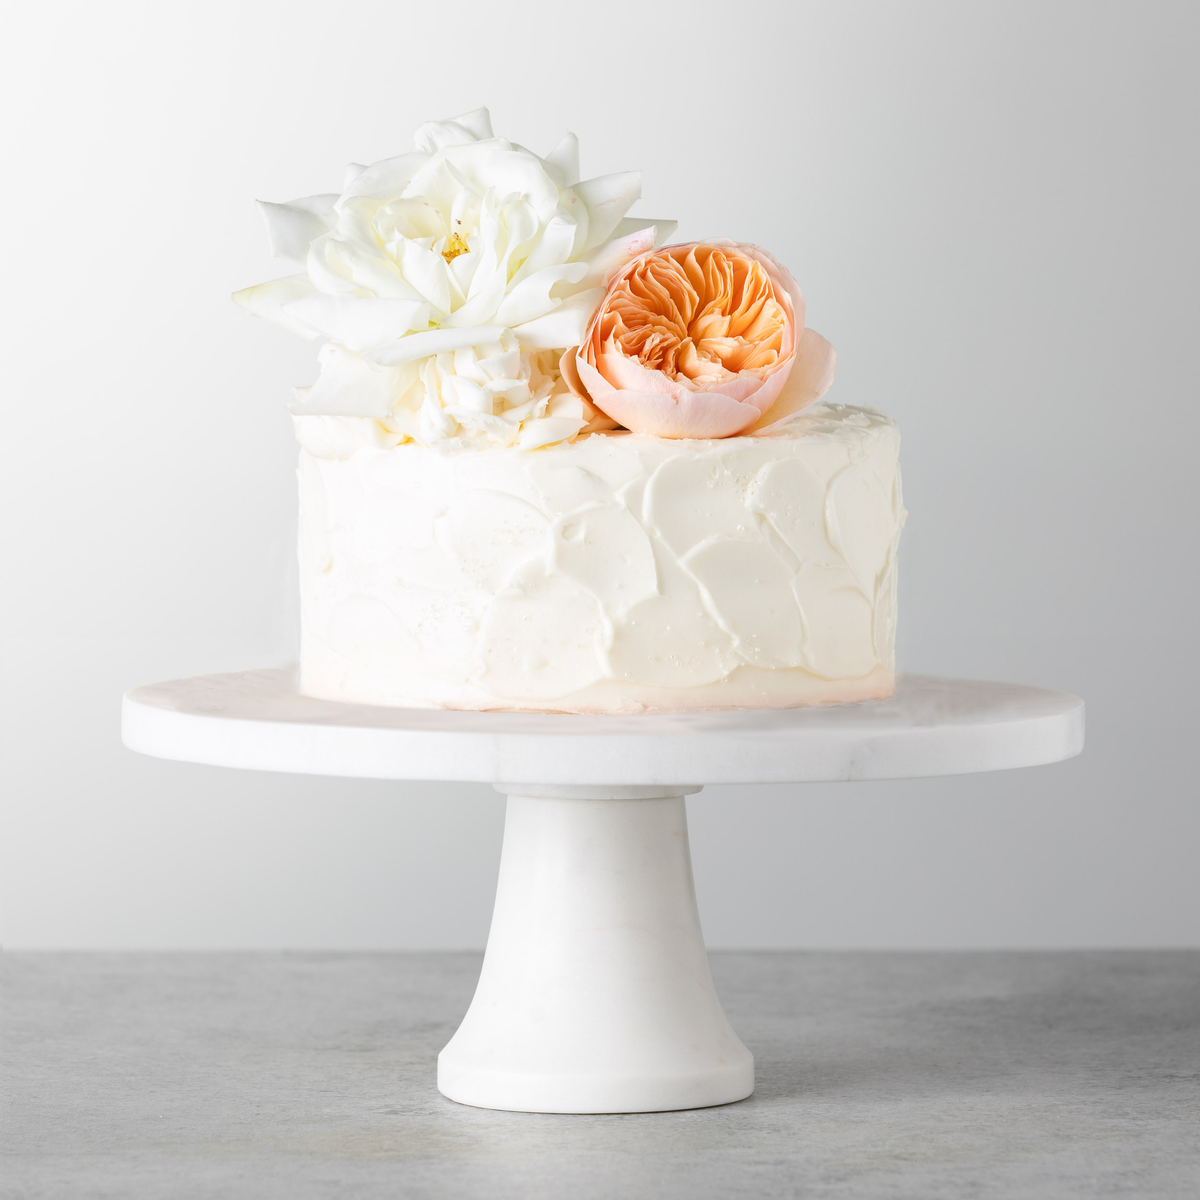 Clouds & Posies Cake – The Evercake